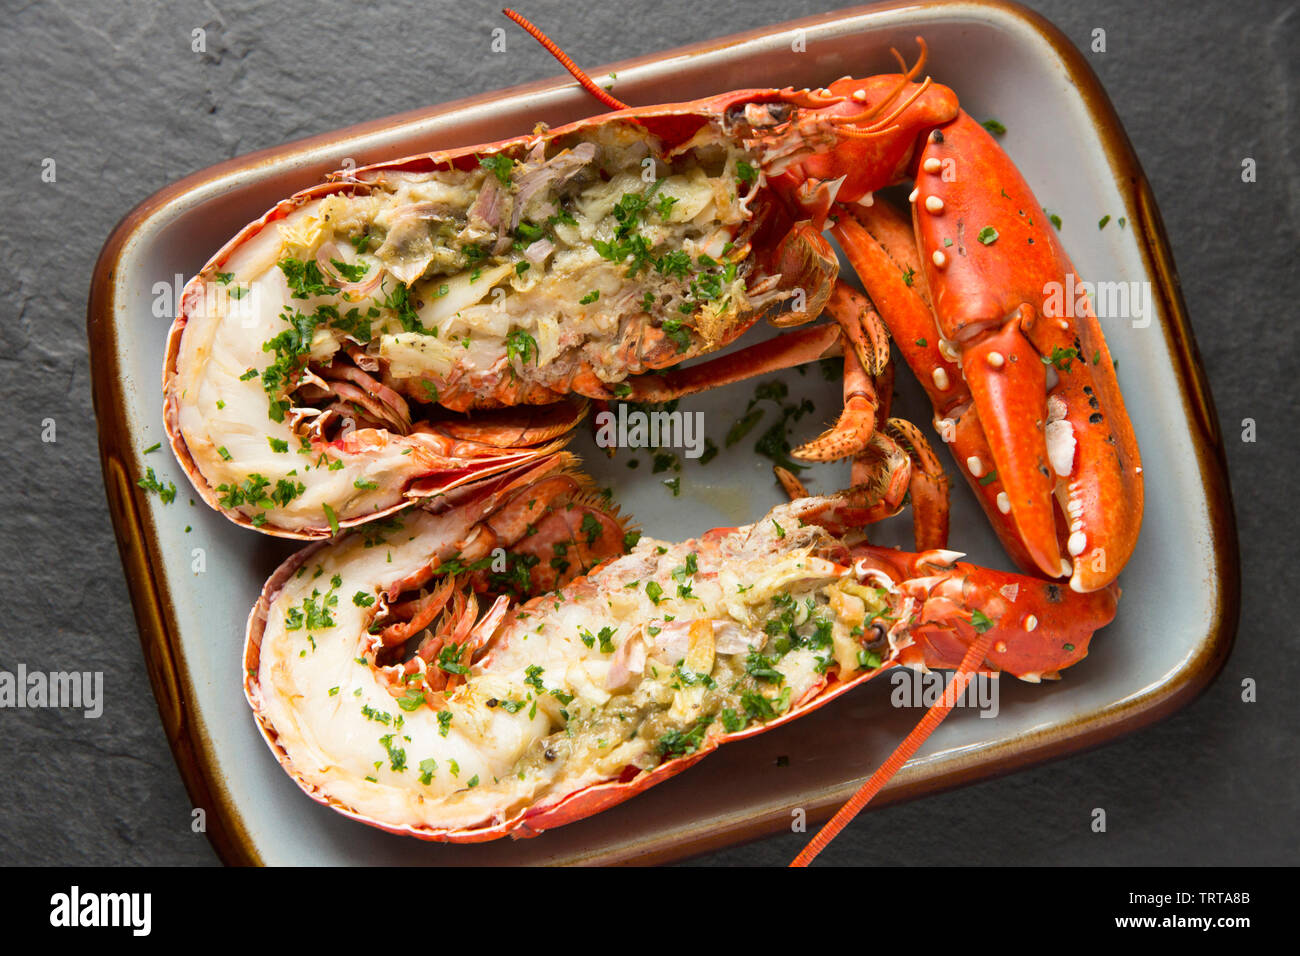 Two halves of a grilled lobster and claws from a lobster, Homarus gammarus, caught in a lobster pot in the English Channel. It has been first boiled, Stock Photo